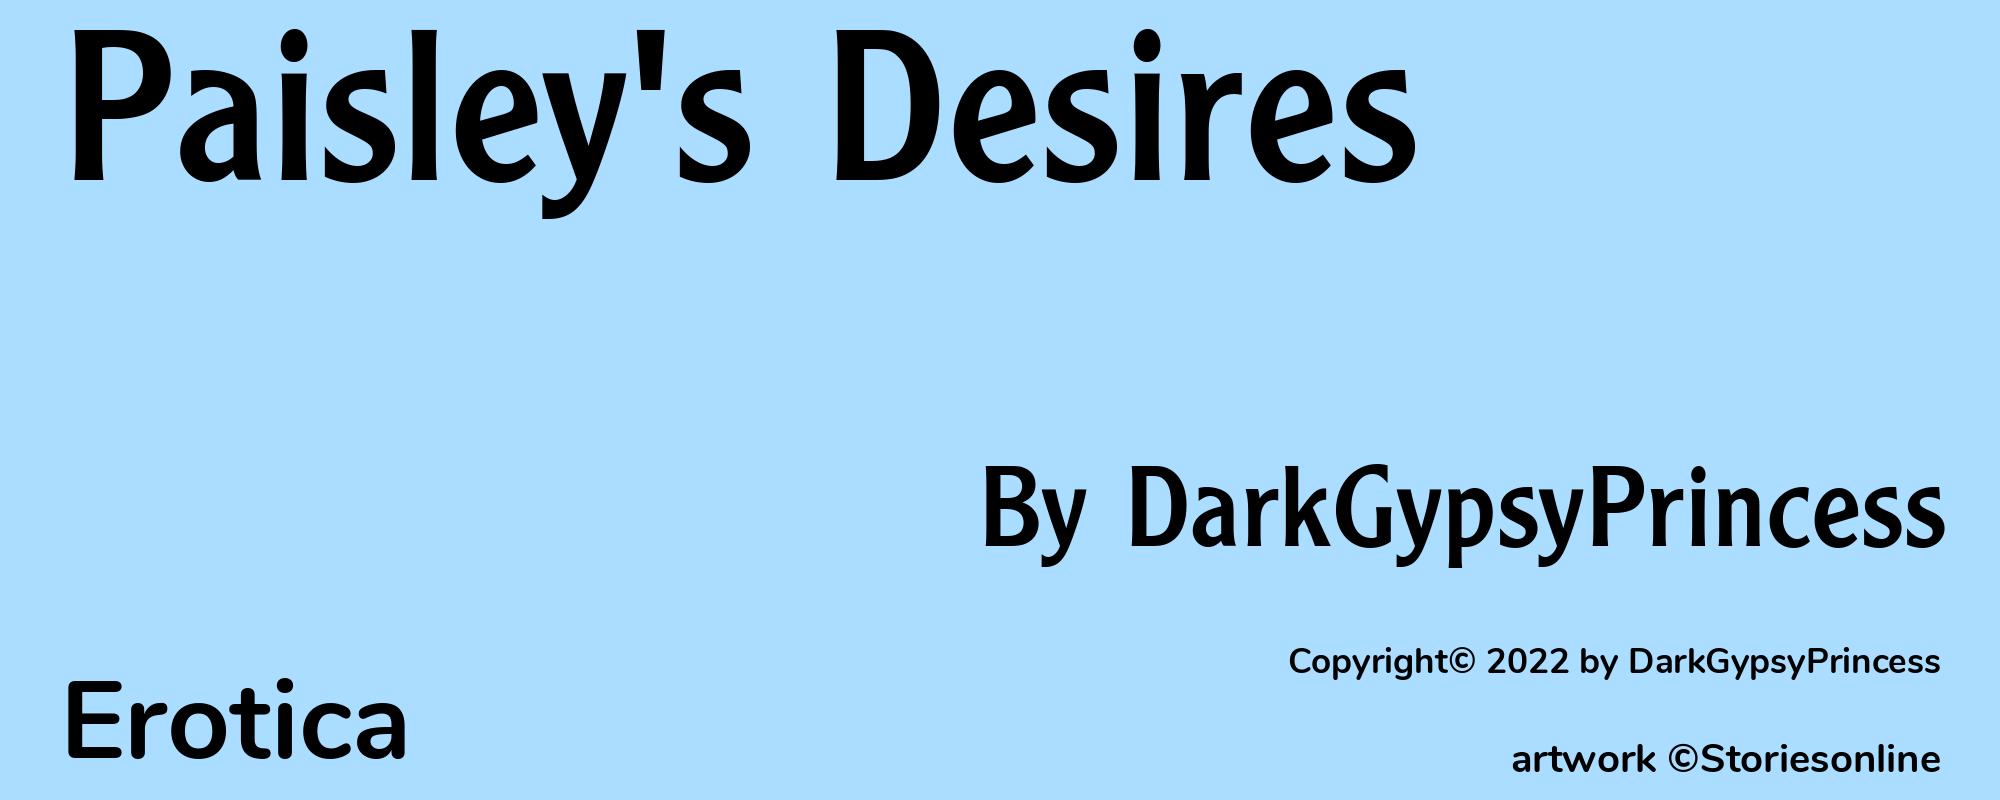 Paisley's Desires - Cover